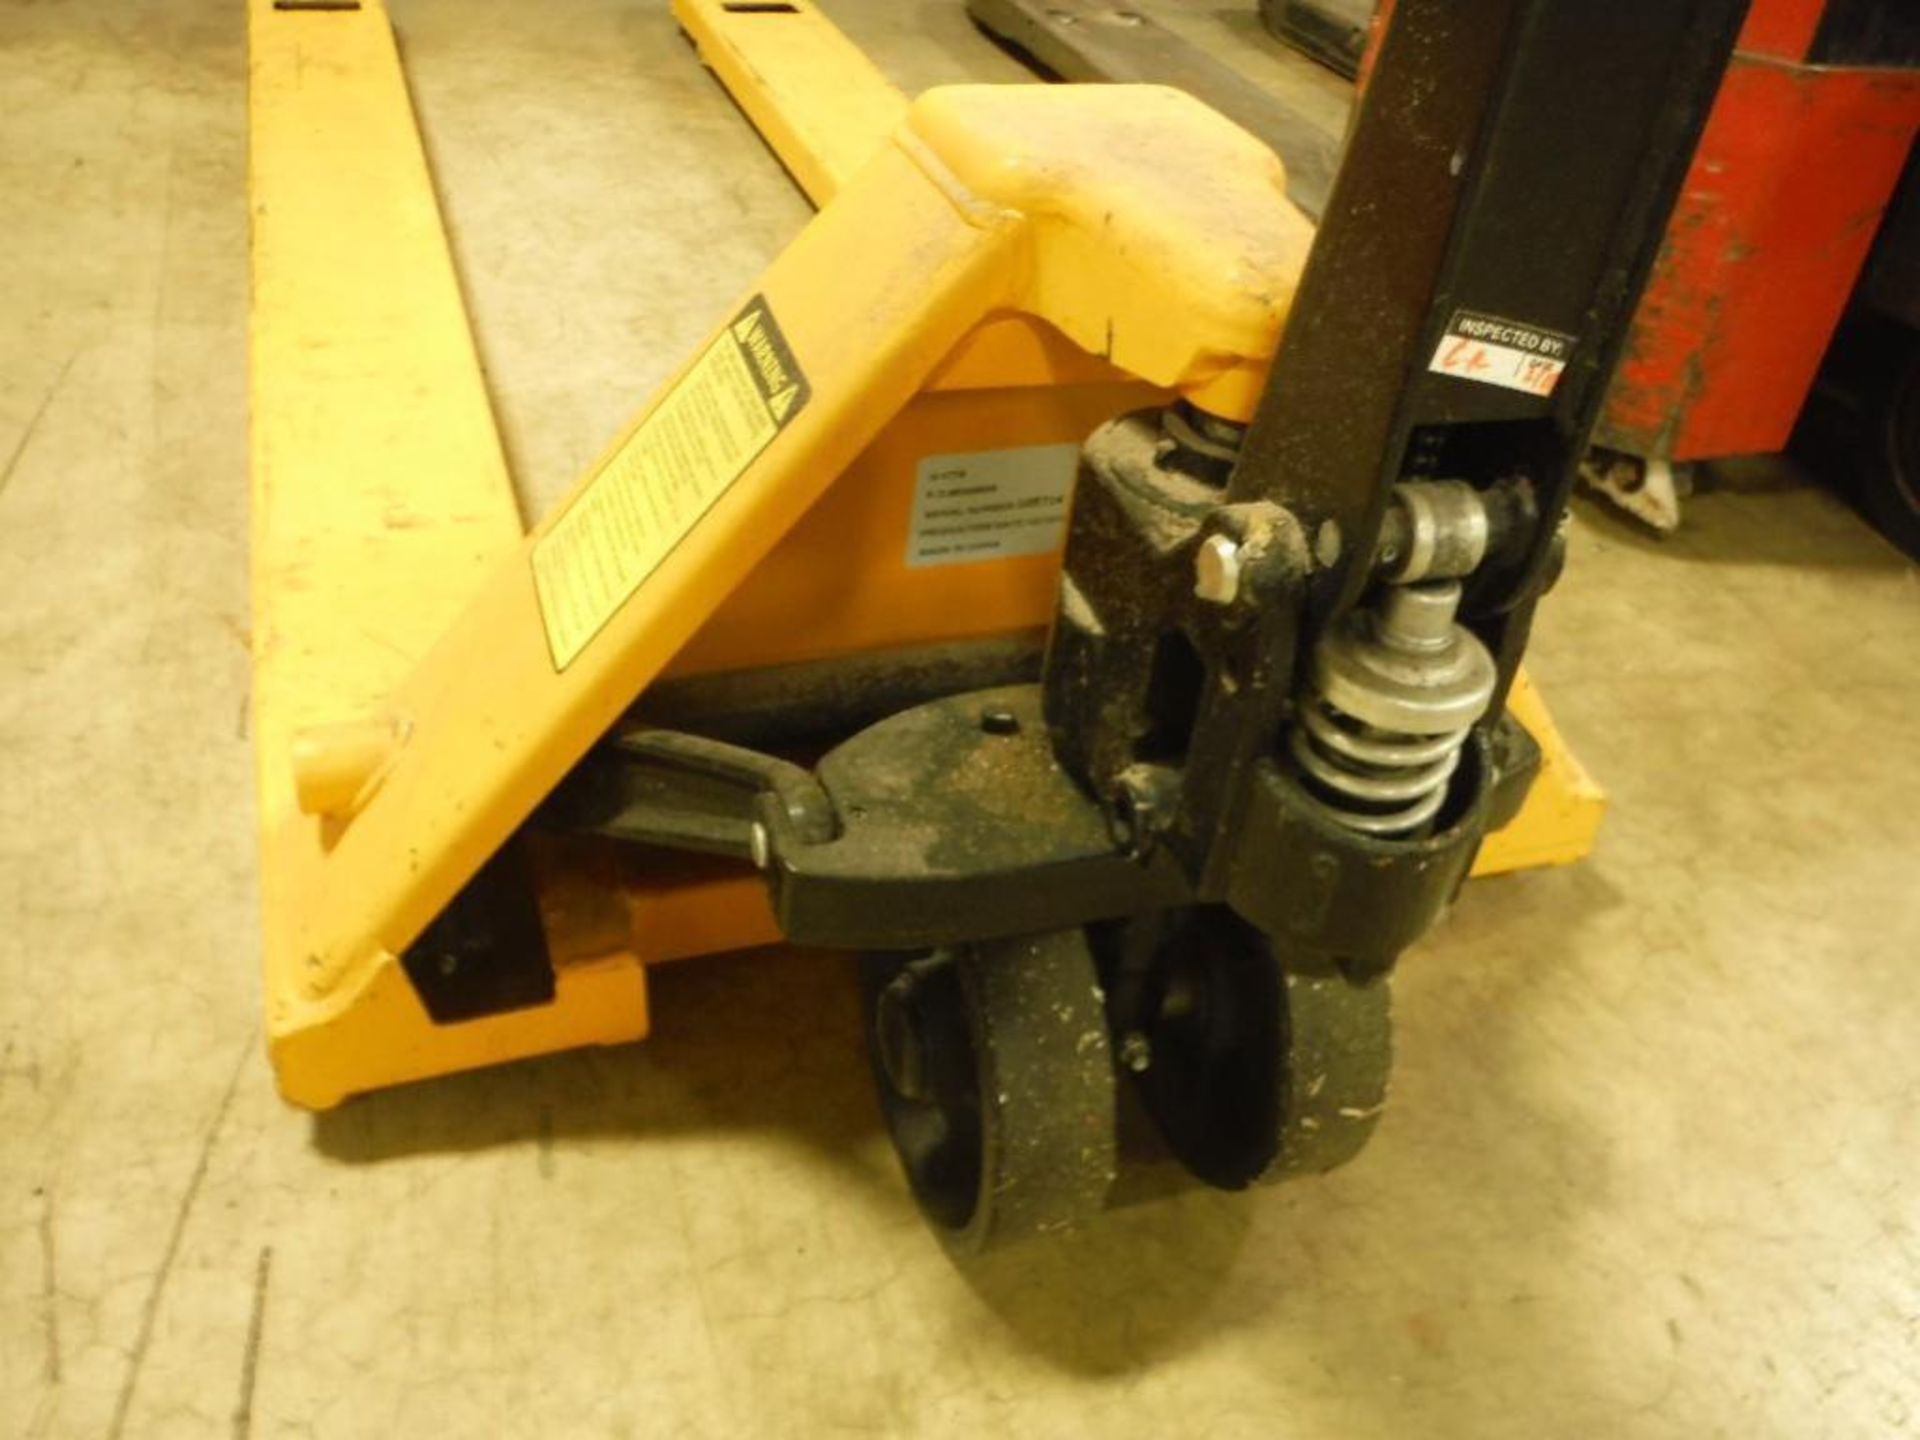 Uline extended pallet jack, Model H-1778, 3300 lb capacity, 72 in. forks, yellow - Rigging Fee: $25 - Image 4 of 4